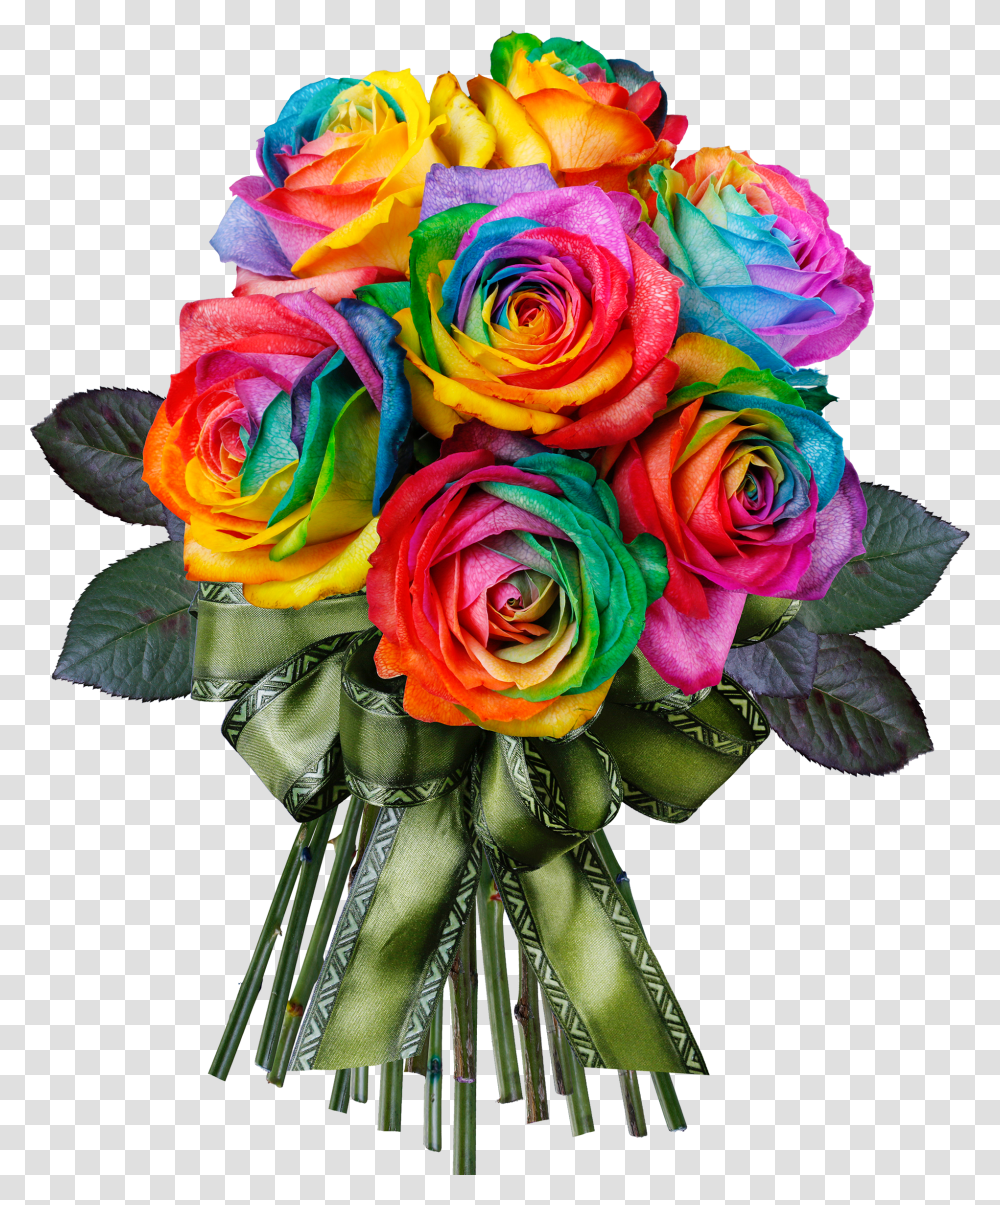 Rainbow Rose Download Rainbow Rose No Background Transparent Png